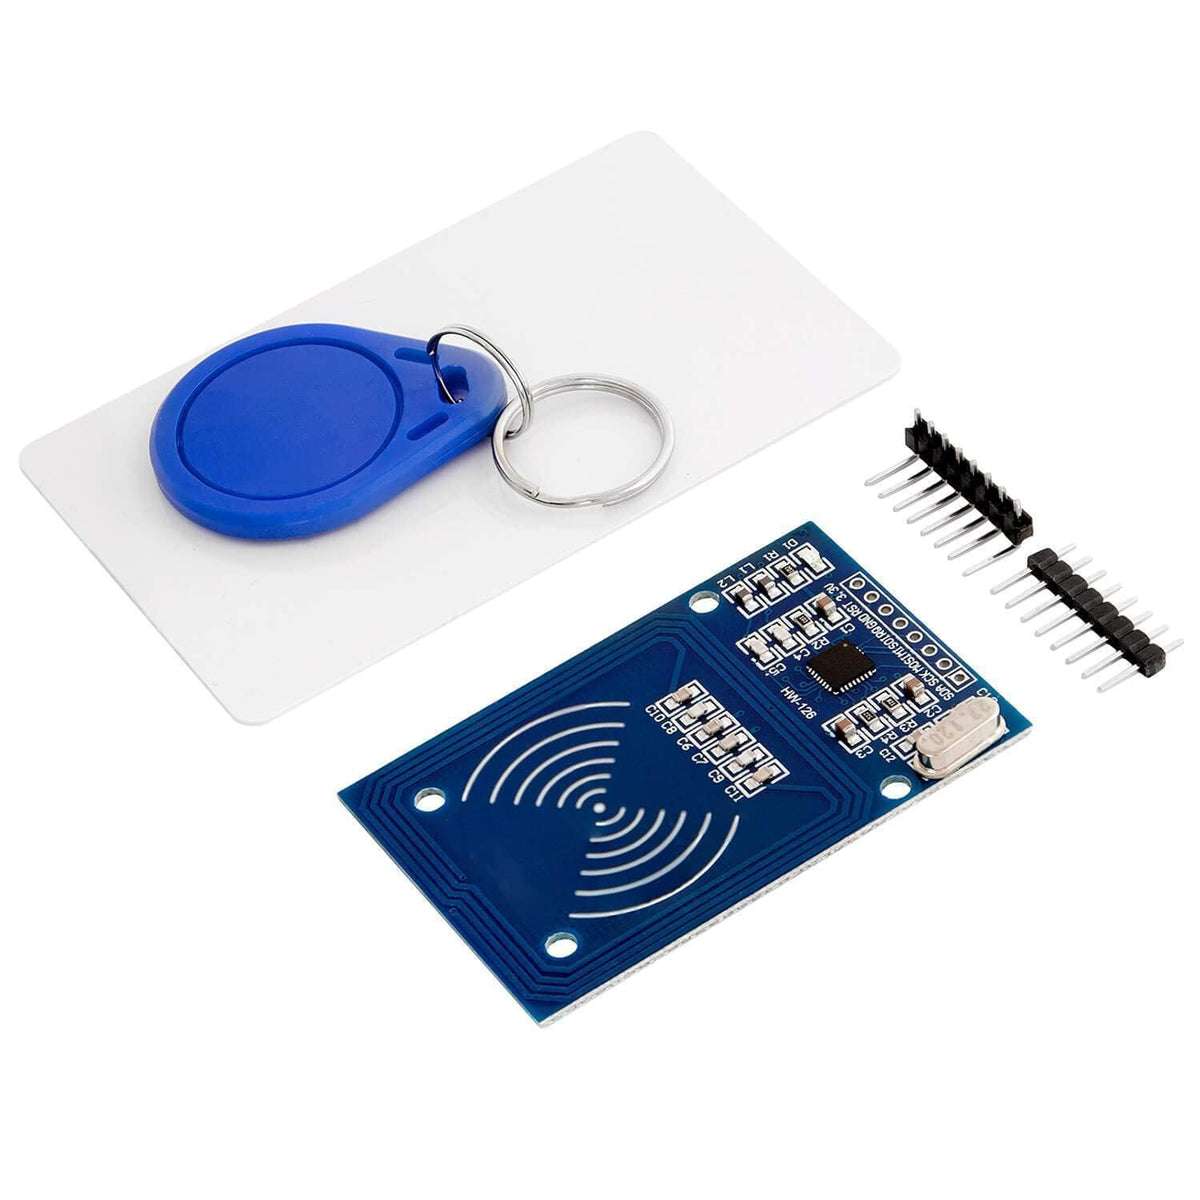 AZDelivery RFID Kit - MFRC522 Compatibel with RC522 RF IC Card Reader Sensor Module, RFID Chip Key Ring and S50 Card 13.56MHz I2C IIC SPI, Compatible with Arduino and Raspberry Pi including E-Book!